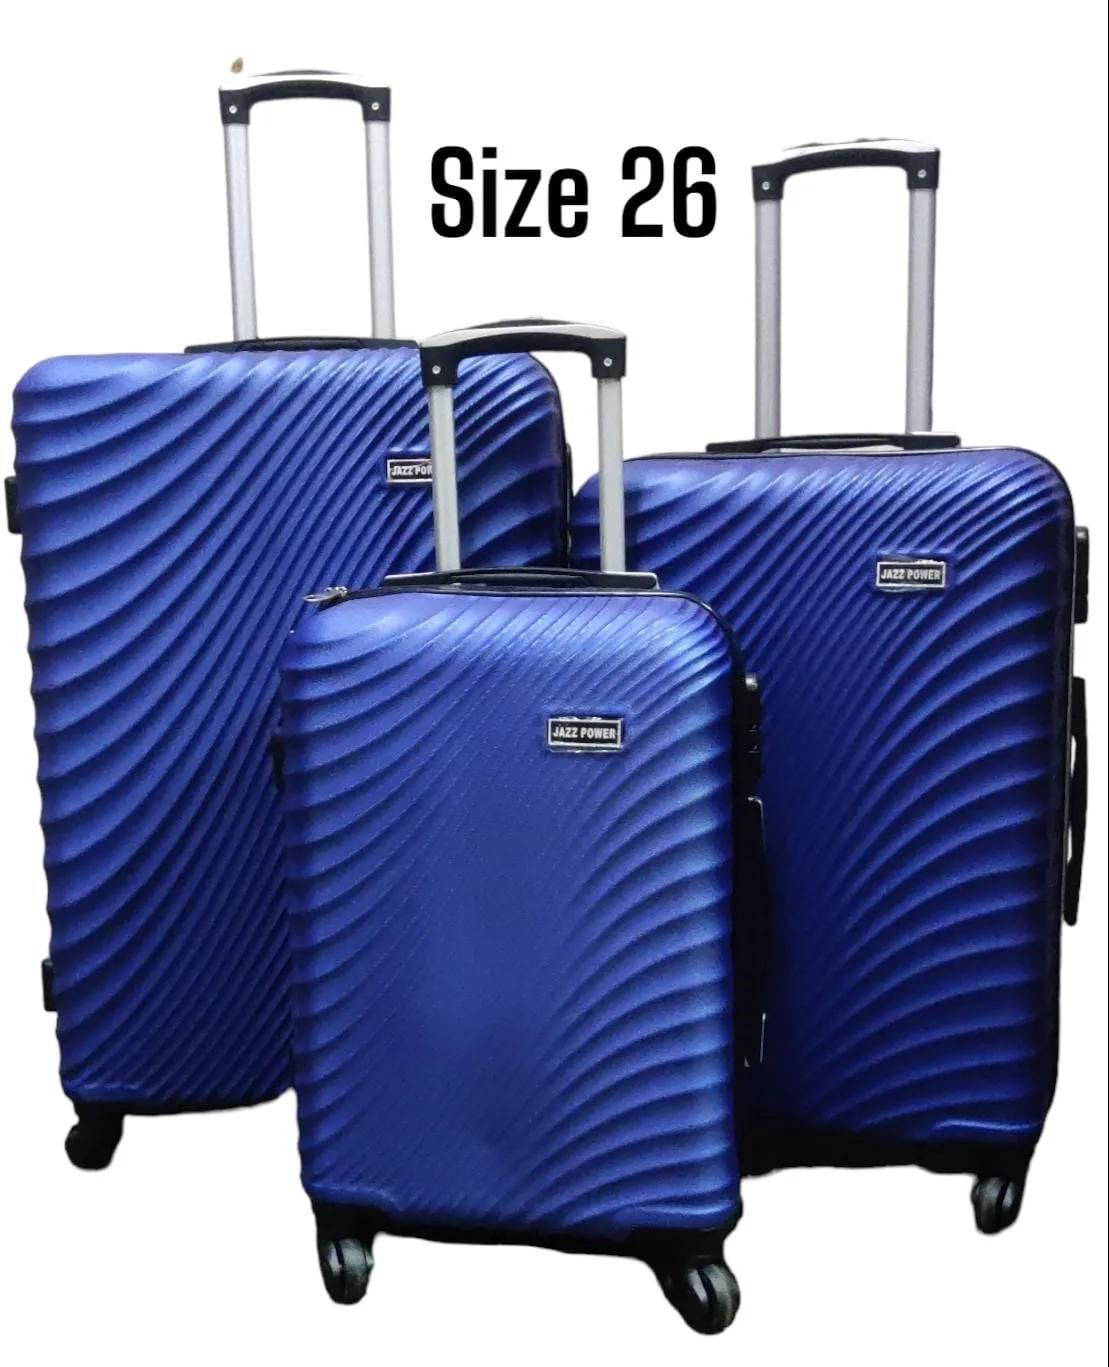 3 in 1 Hot Fashion Travel On Road Luggage Suitcase Protective. Keep dry and store in a cool and ventilated place. To Avoid exposure to the sun, fire, washing, sharp objects and con